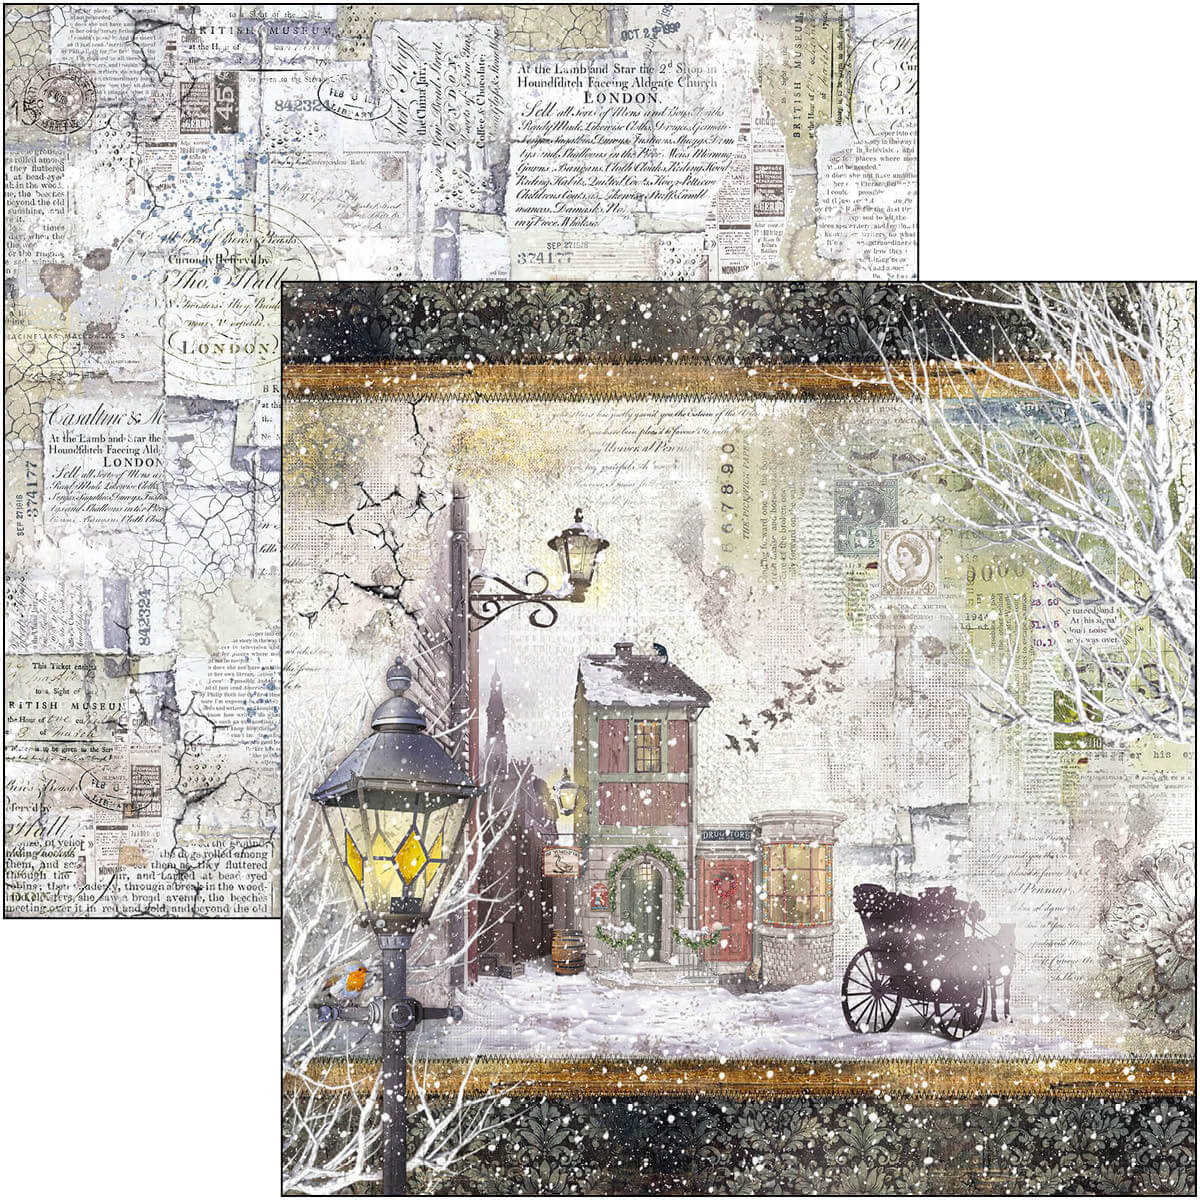 Ciao Bella 1 Piece WINTER GREETINGS Scrapbook Paper Scrapbooking Paper 12 X  12 Inches Mixed Media Made in Italy CBSS162 